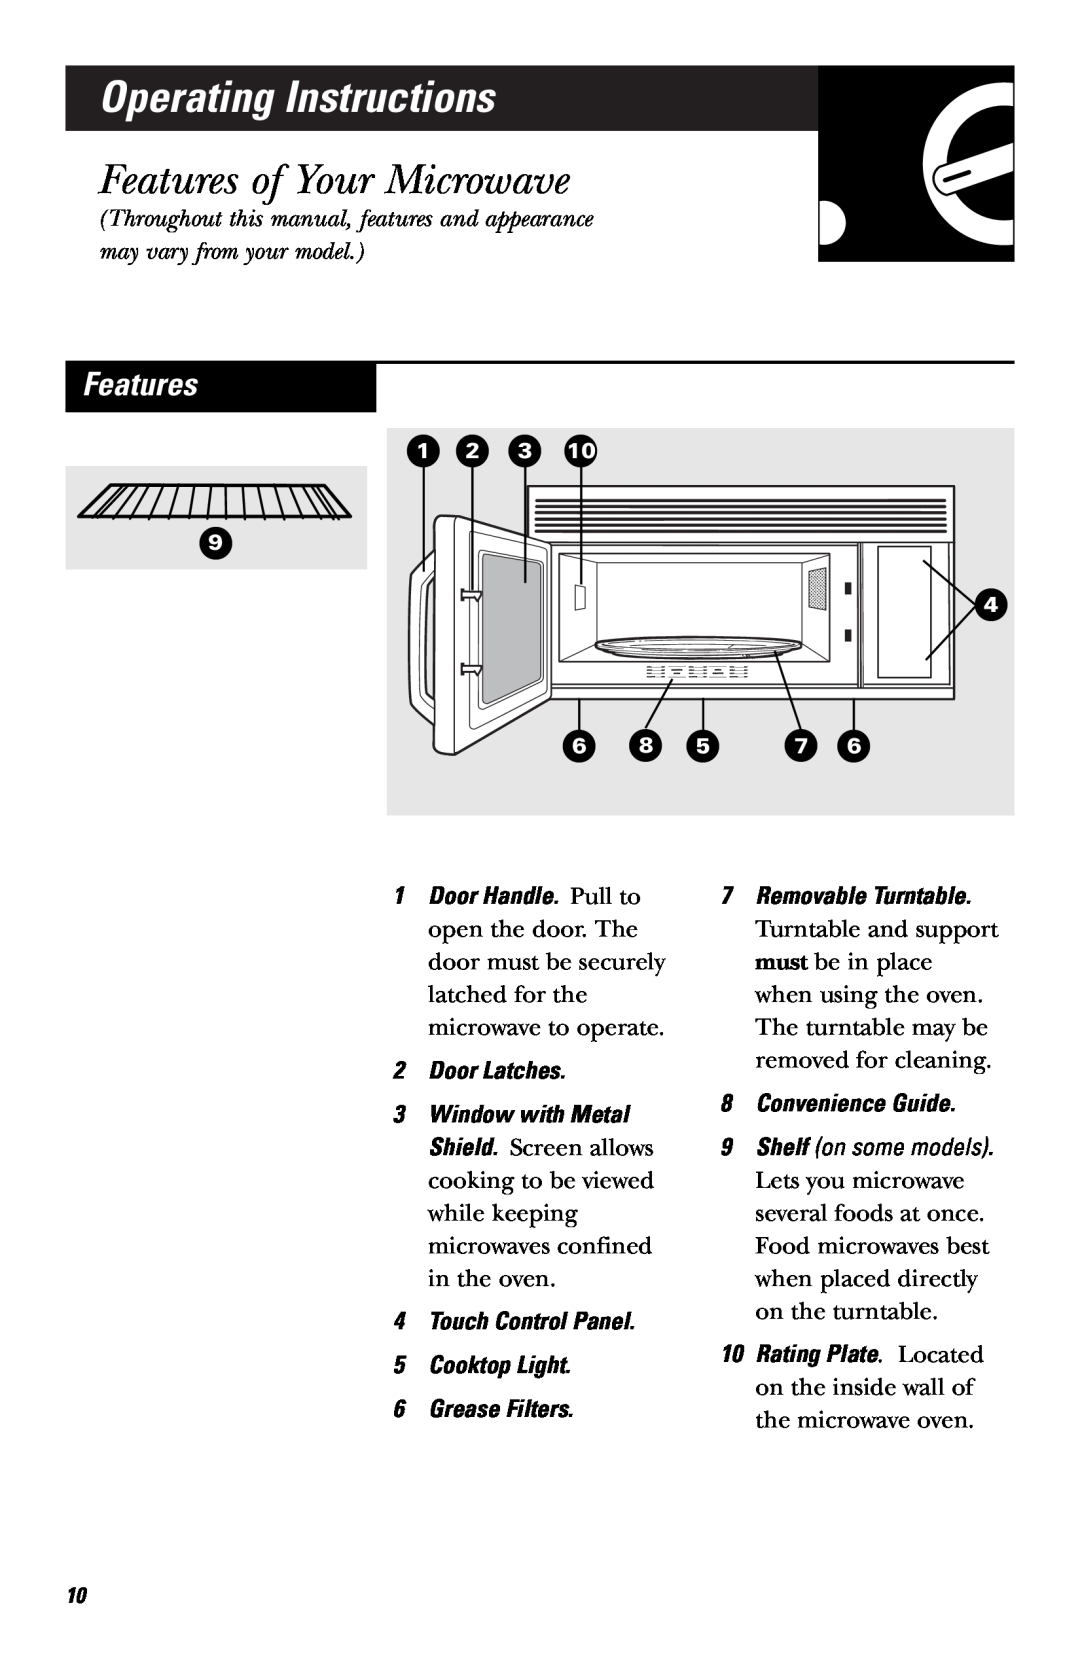 GE JNM1541 Operating Instructions, Features of Your Microwave, Door Latches, Removable Turntable, Convenience Guide 